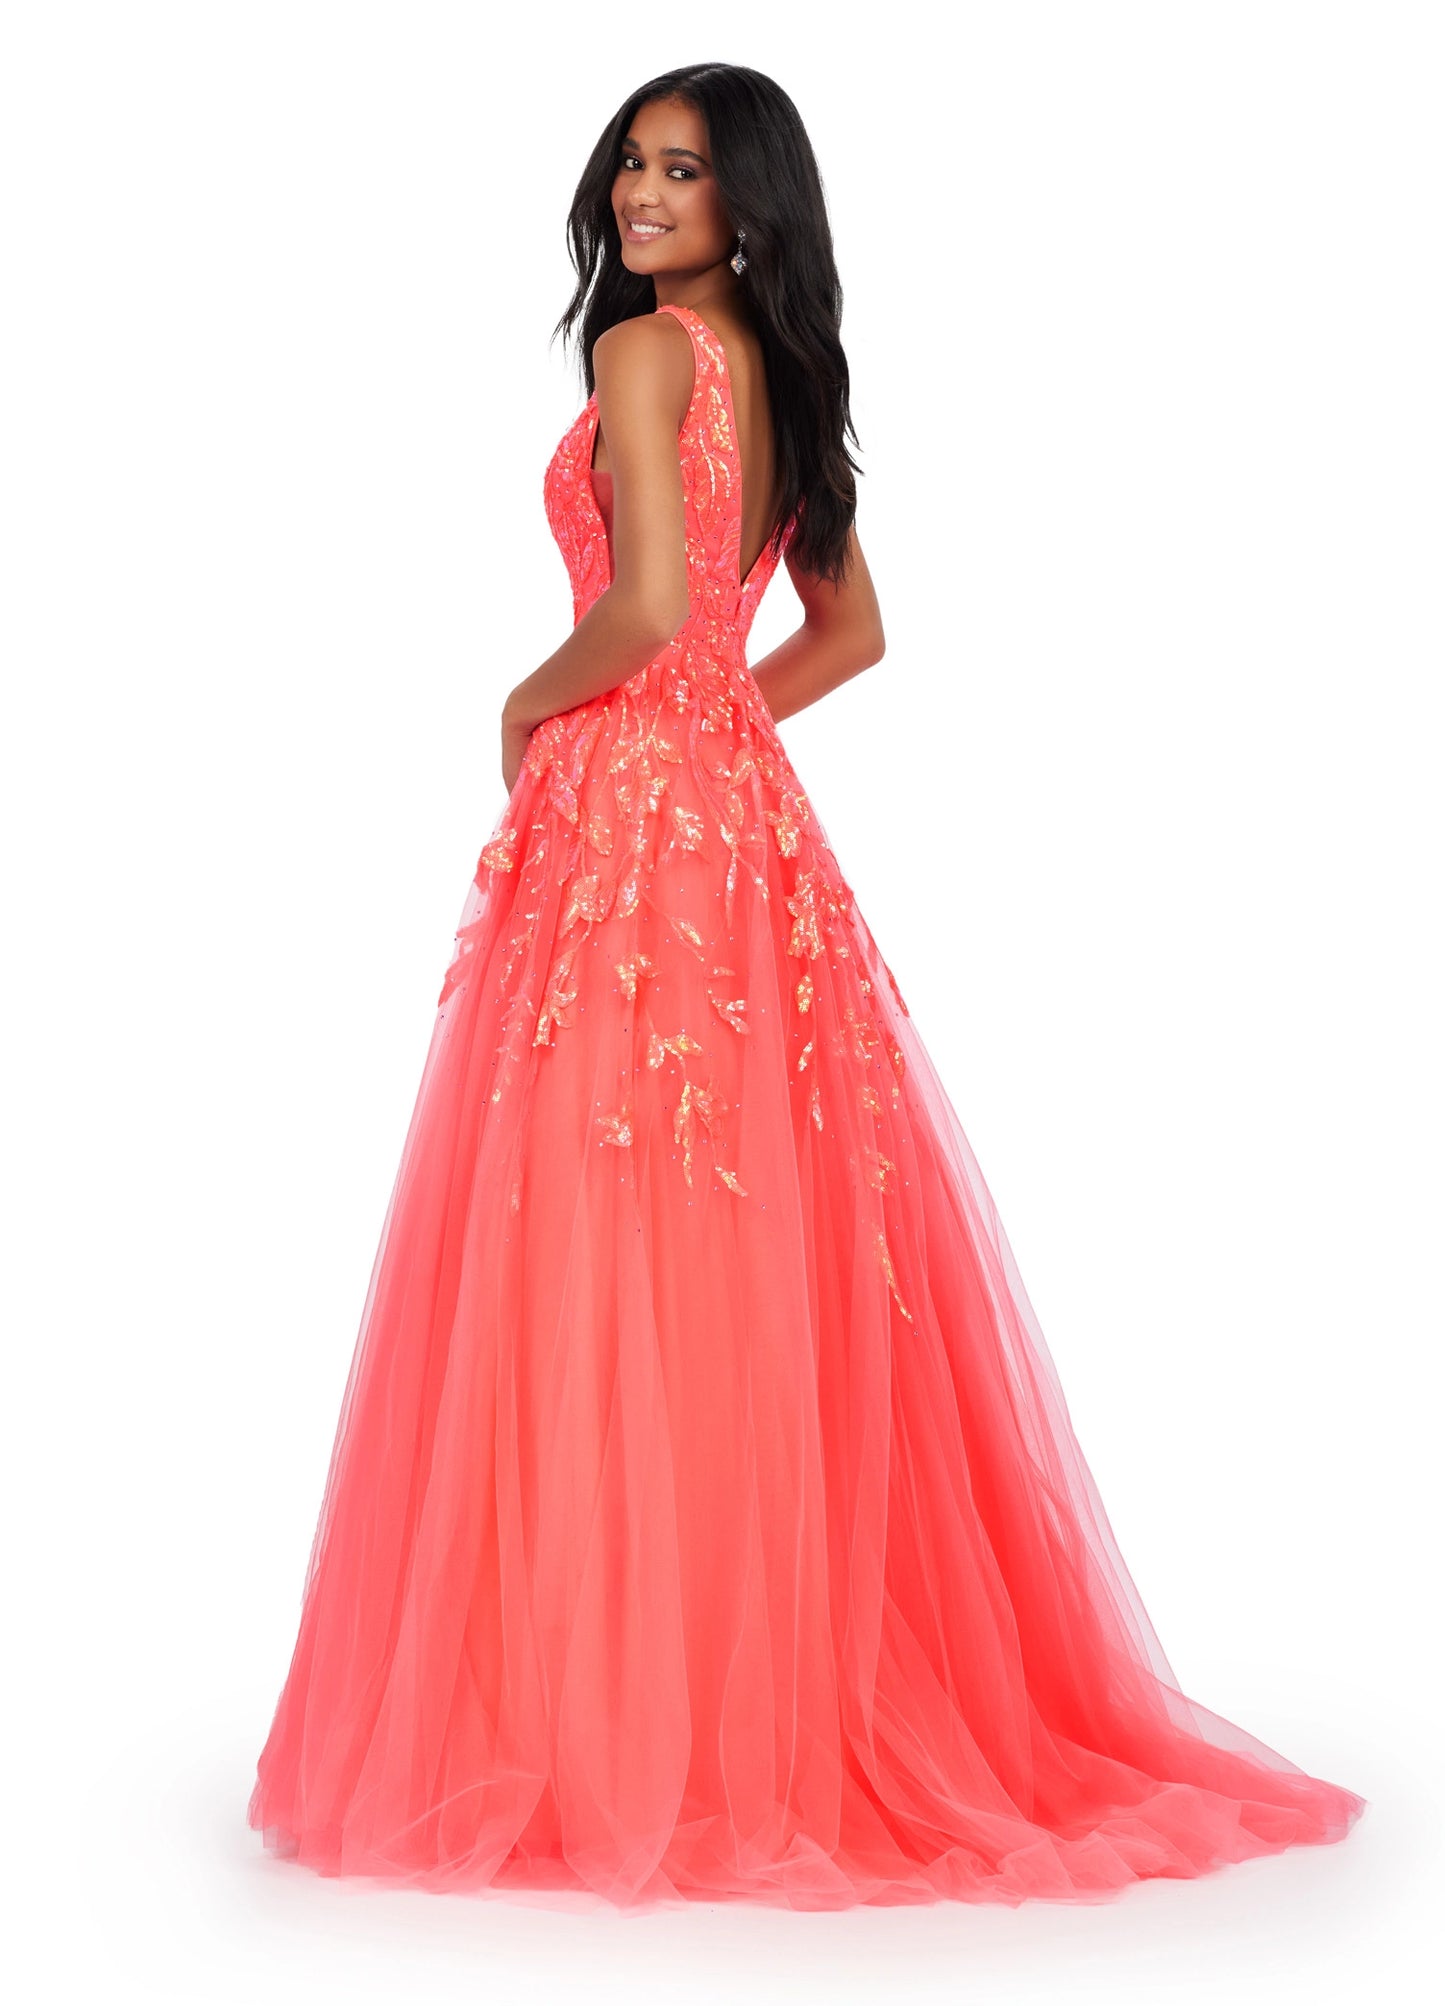 This Ashley Lauren 11470 Prom Dress will make a statement at any occasion. Made with sequin fabric and a pleated tulle skirt, the A-line silhouette will flatter any body shape, while the V-neckline adds a touch of sophistication. This glamorous gown is the perfect choice for making a lasting impression. 